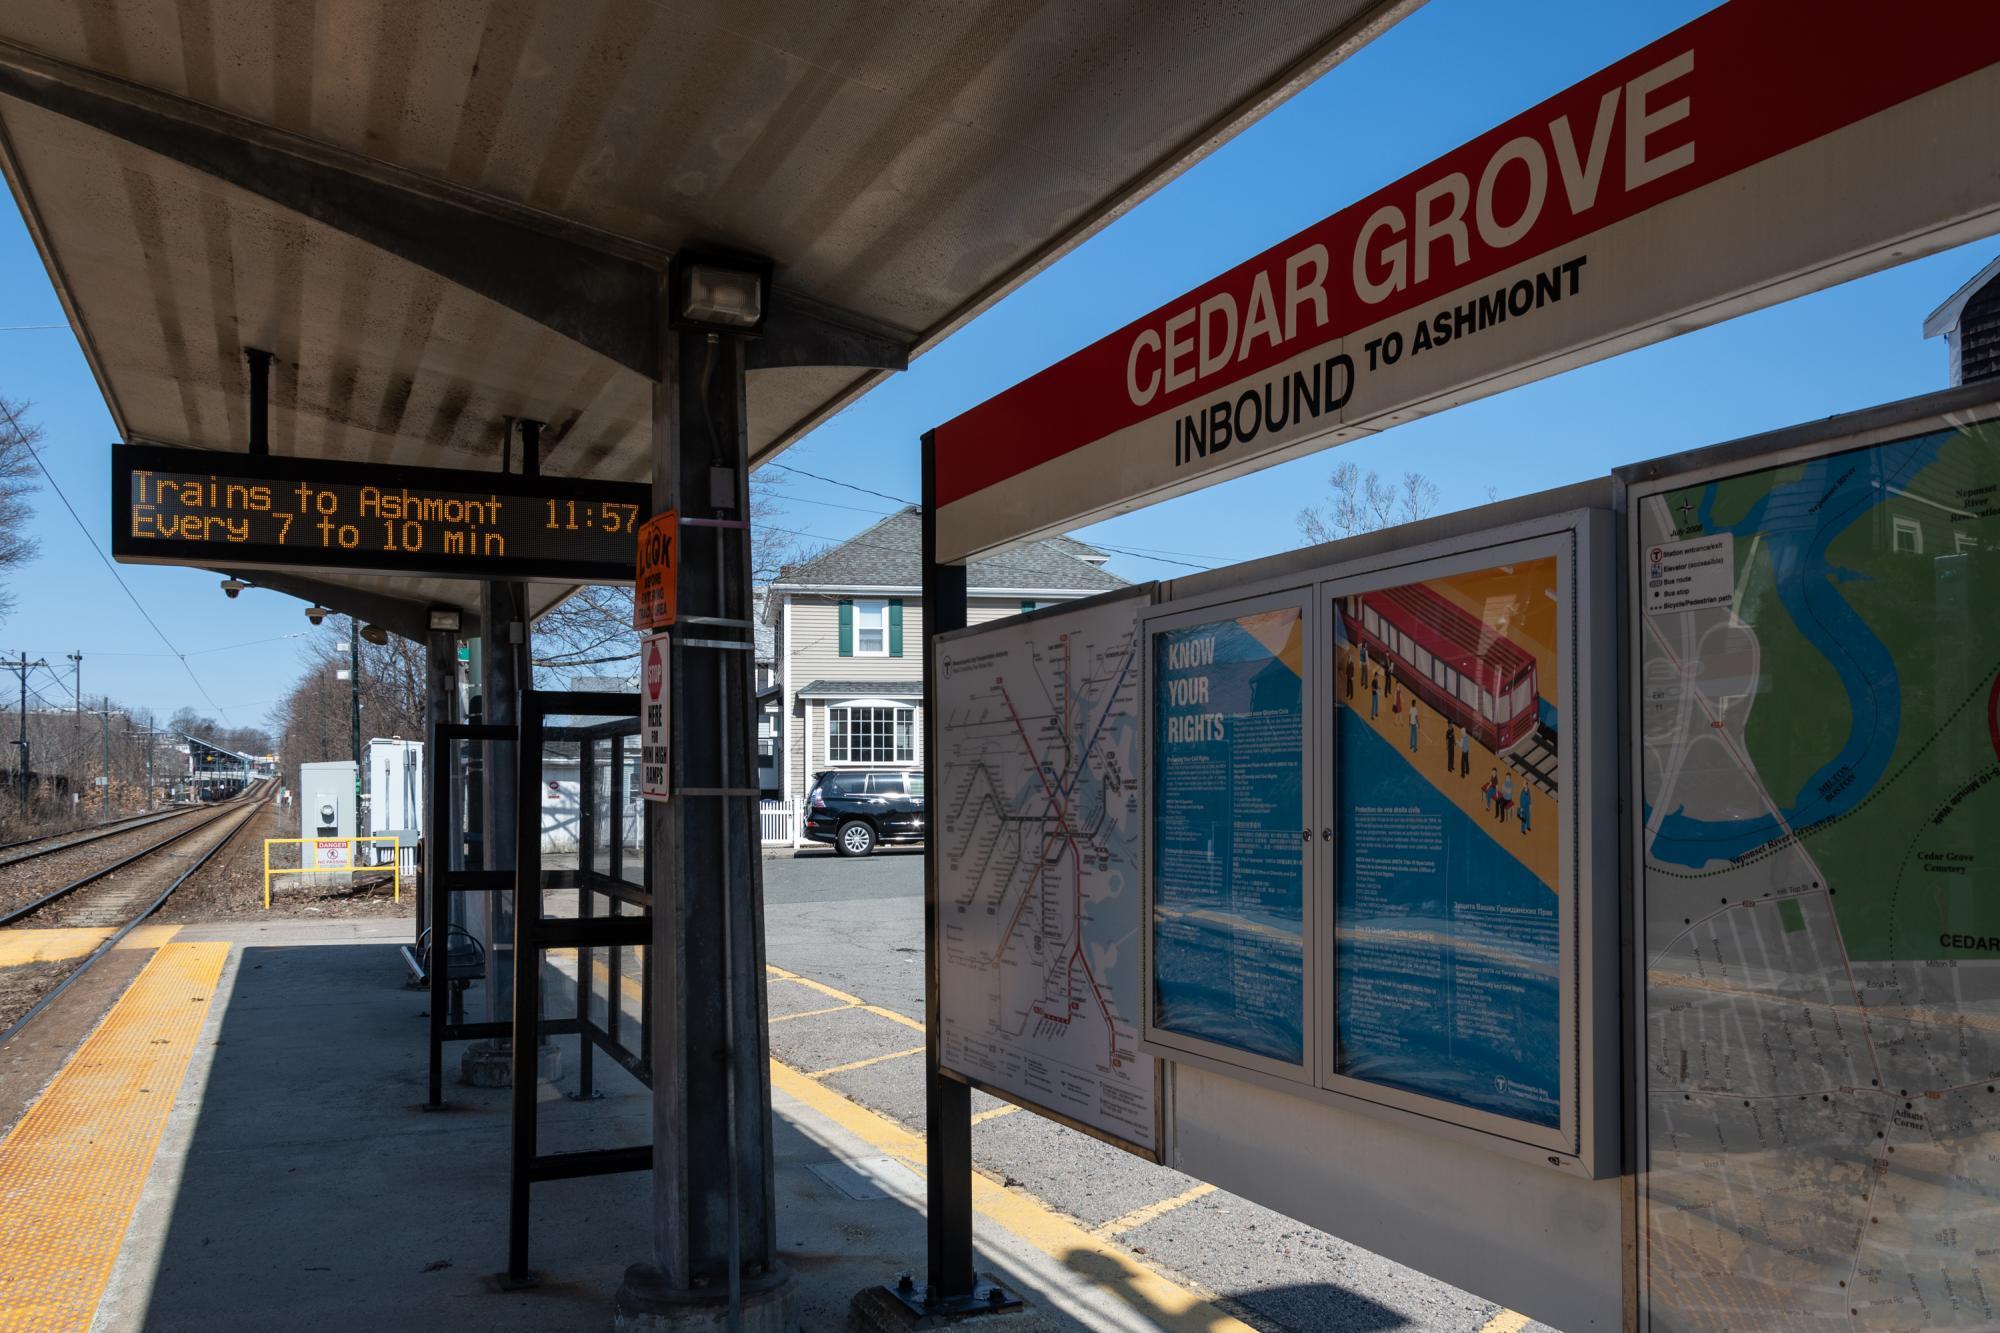 The station sign, maps, and coundown clock on the platform of Cedar Grove Station on the Mattapan Line